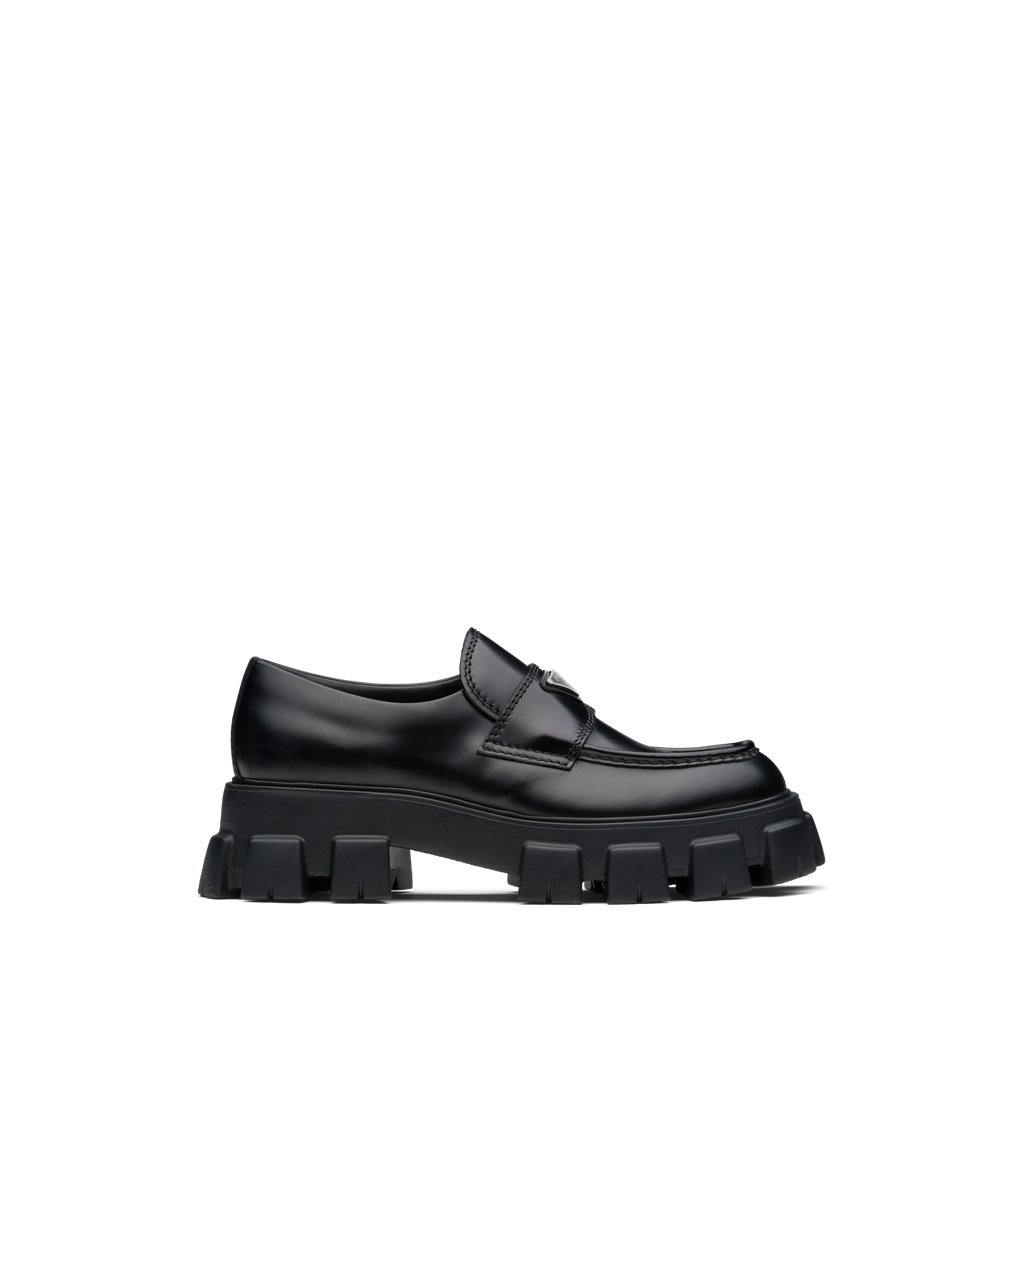 Prada Monolith Brushed Leather Loafers Black | 6248VIEDG